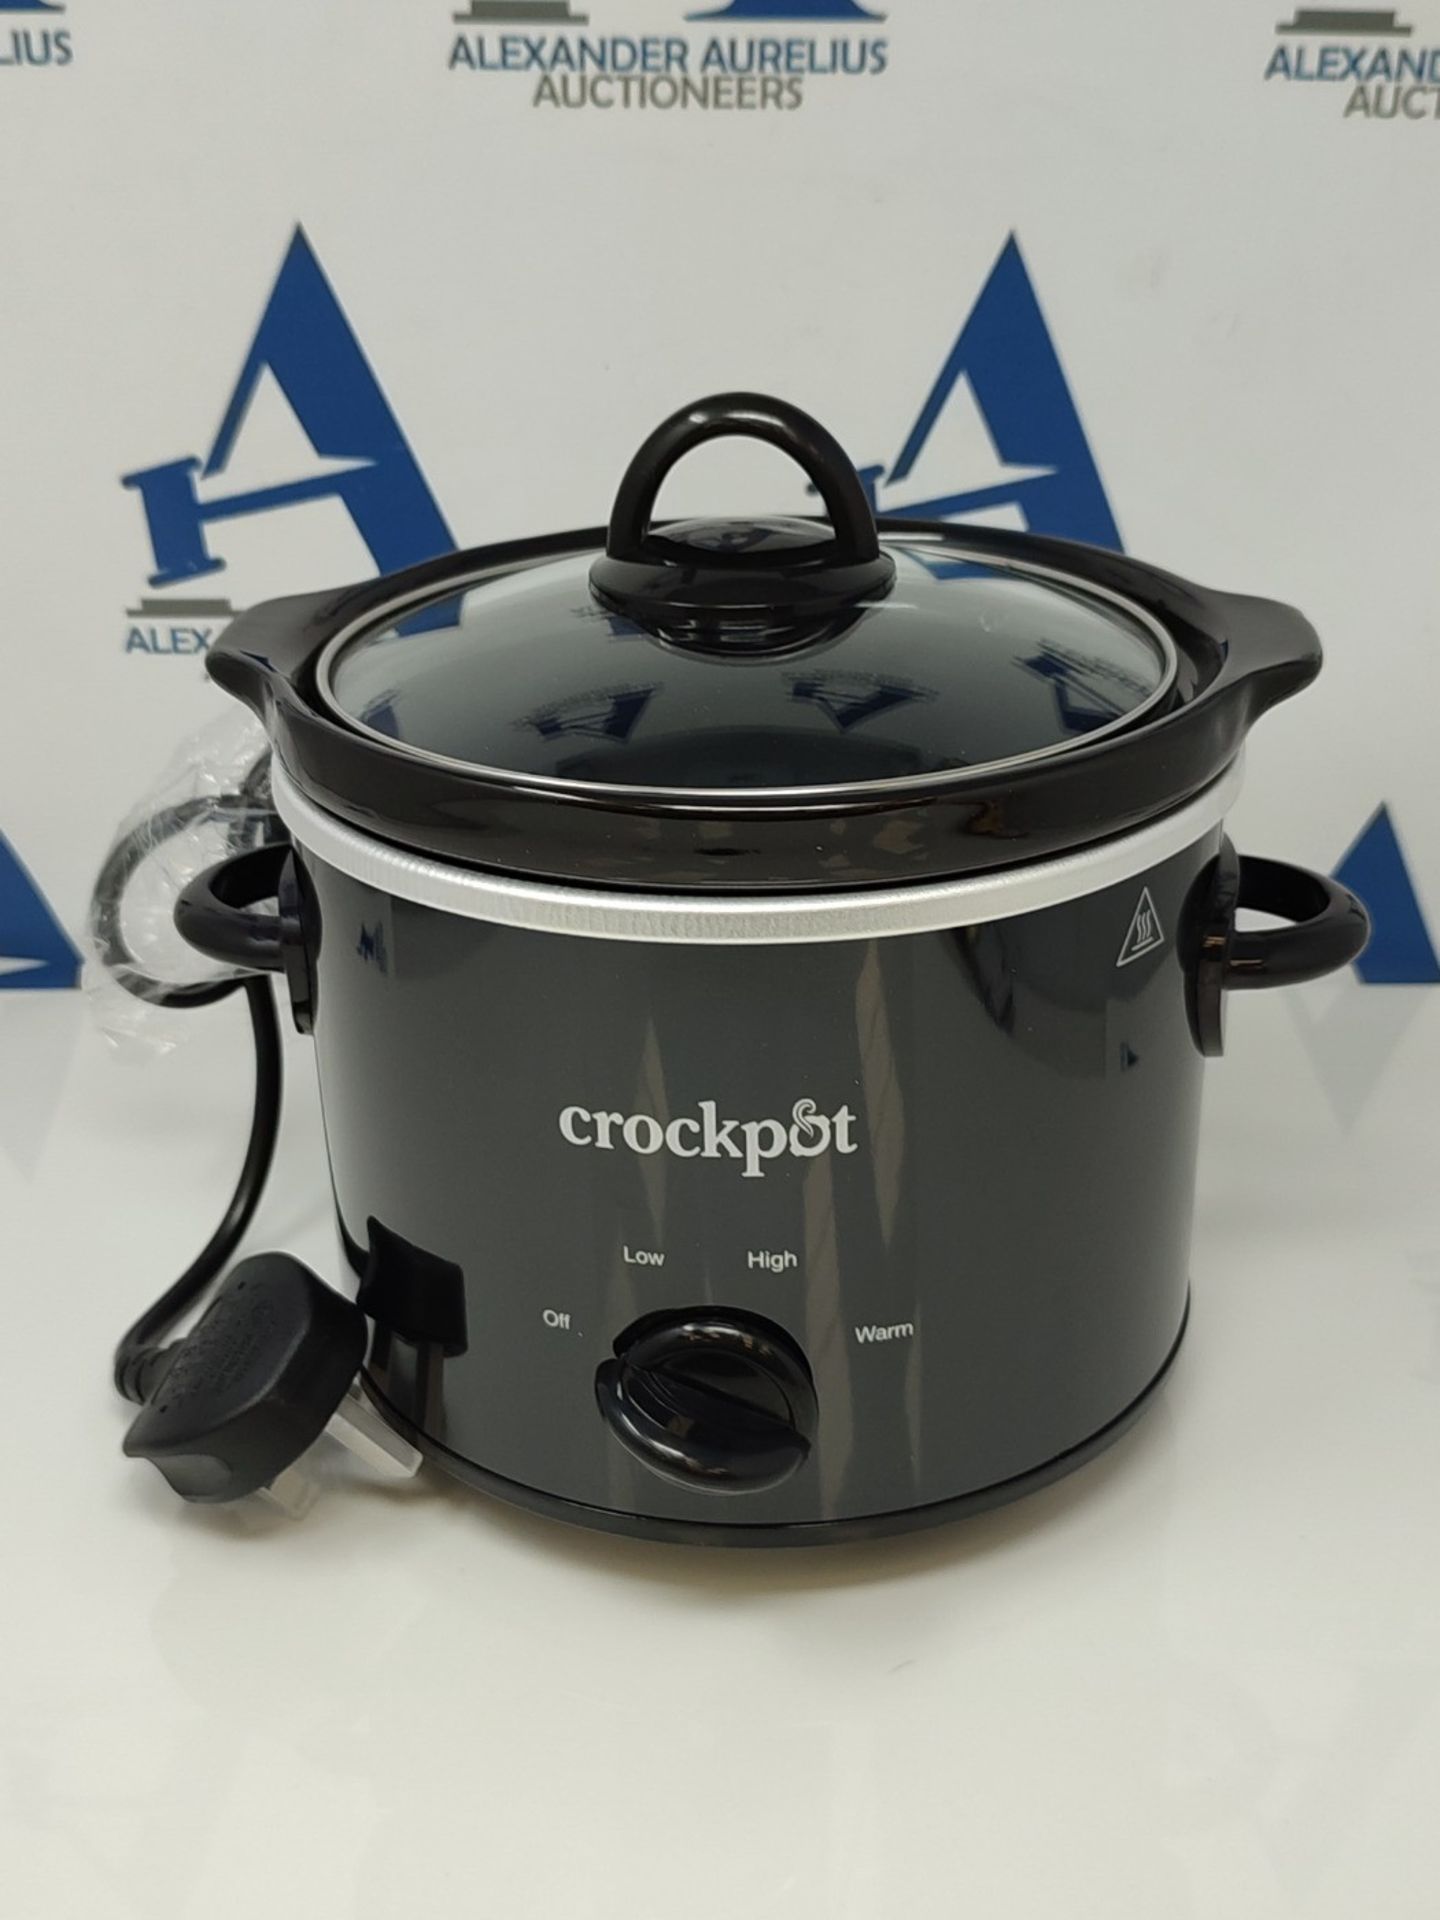 Crockpot Slow Cooker | Removable Easy-Clean Ceramic Bowl | 1.8 L Small Slow Cooker (Se - Image 3 of 3